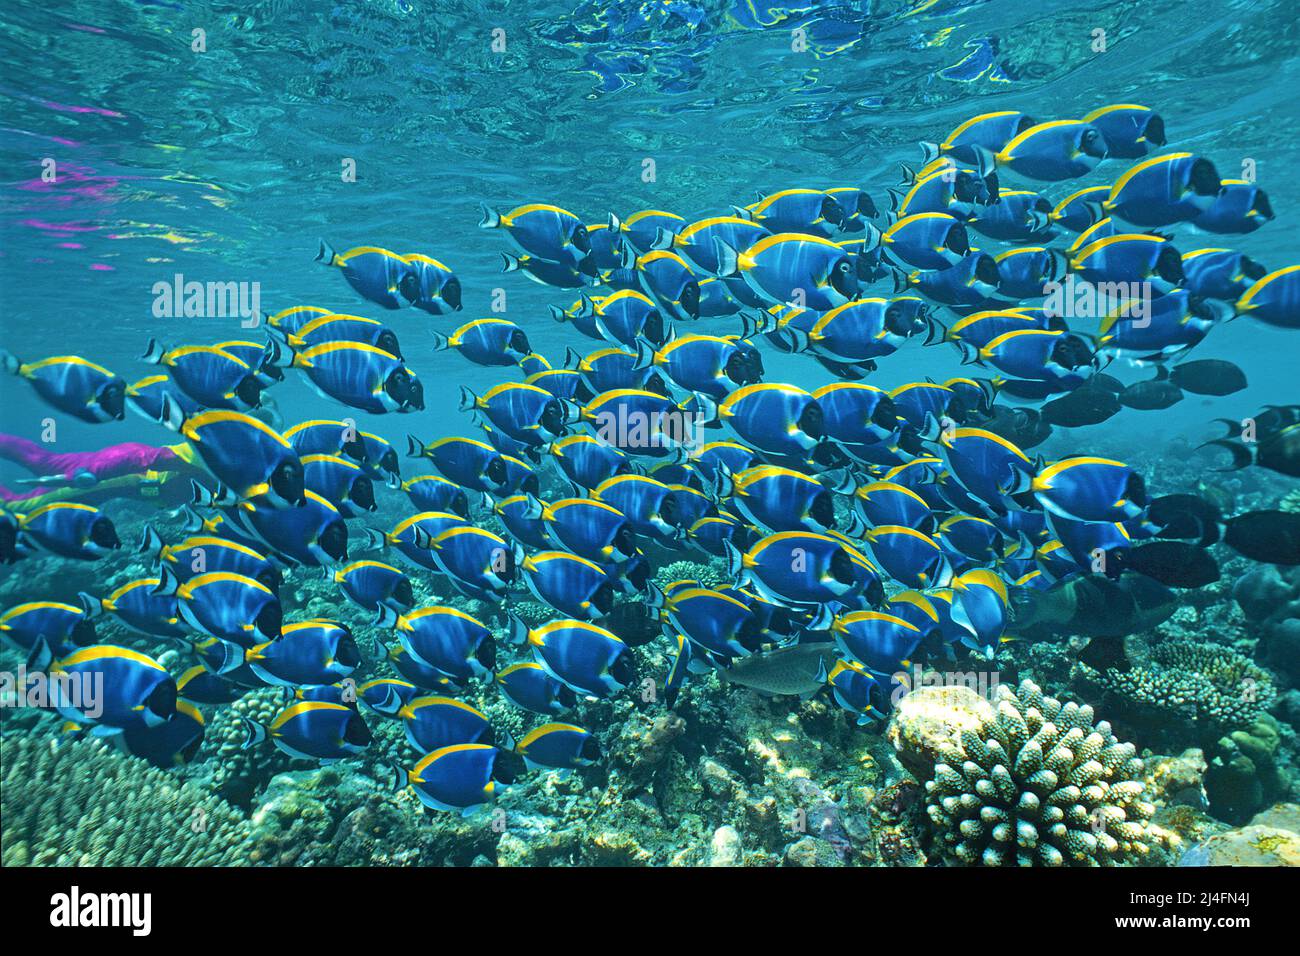 Snorkeler in tropical coral reef with Powderblue Surgeonfishes (Acanthurus leucosternon), Ari Atoll, Maldives, Indian ocean, Asia Stock Photo